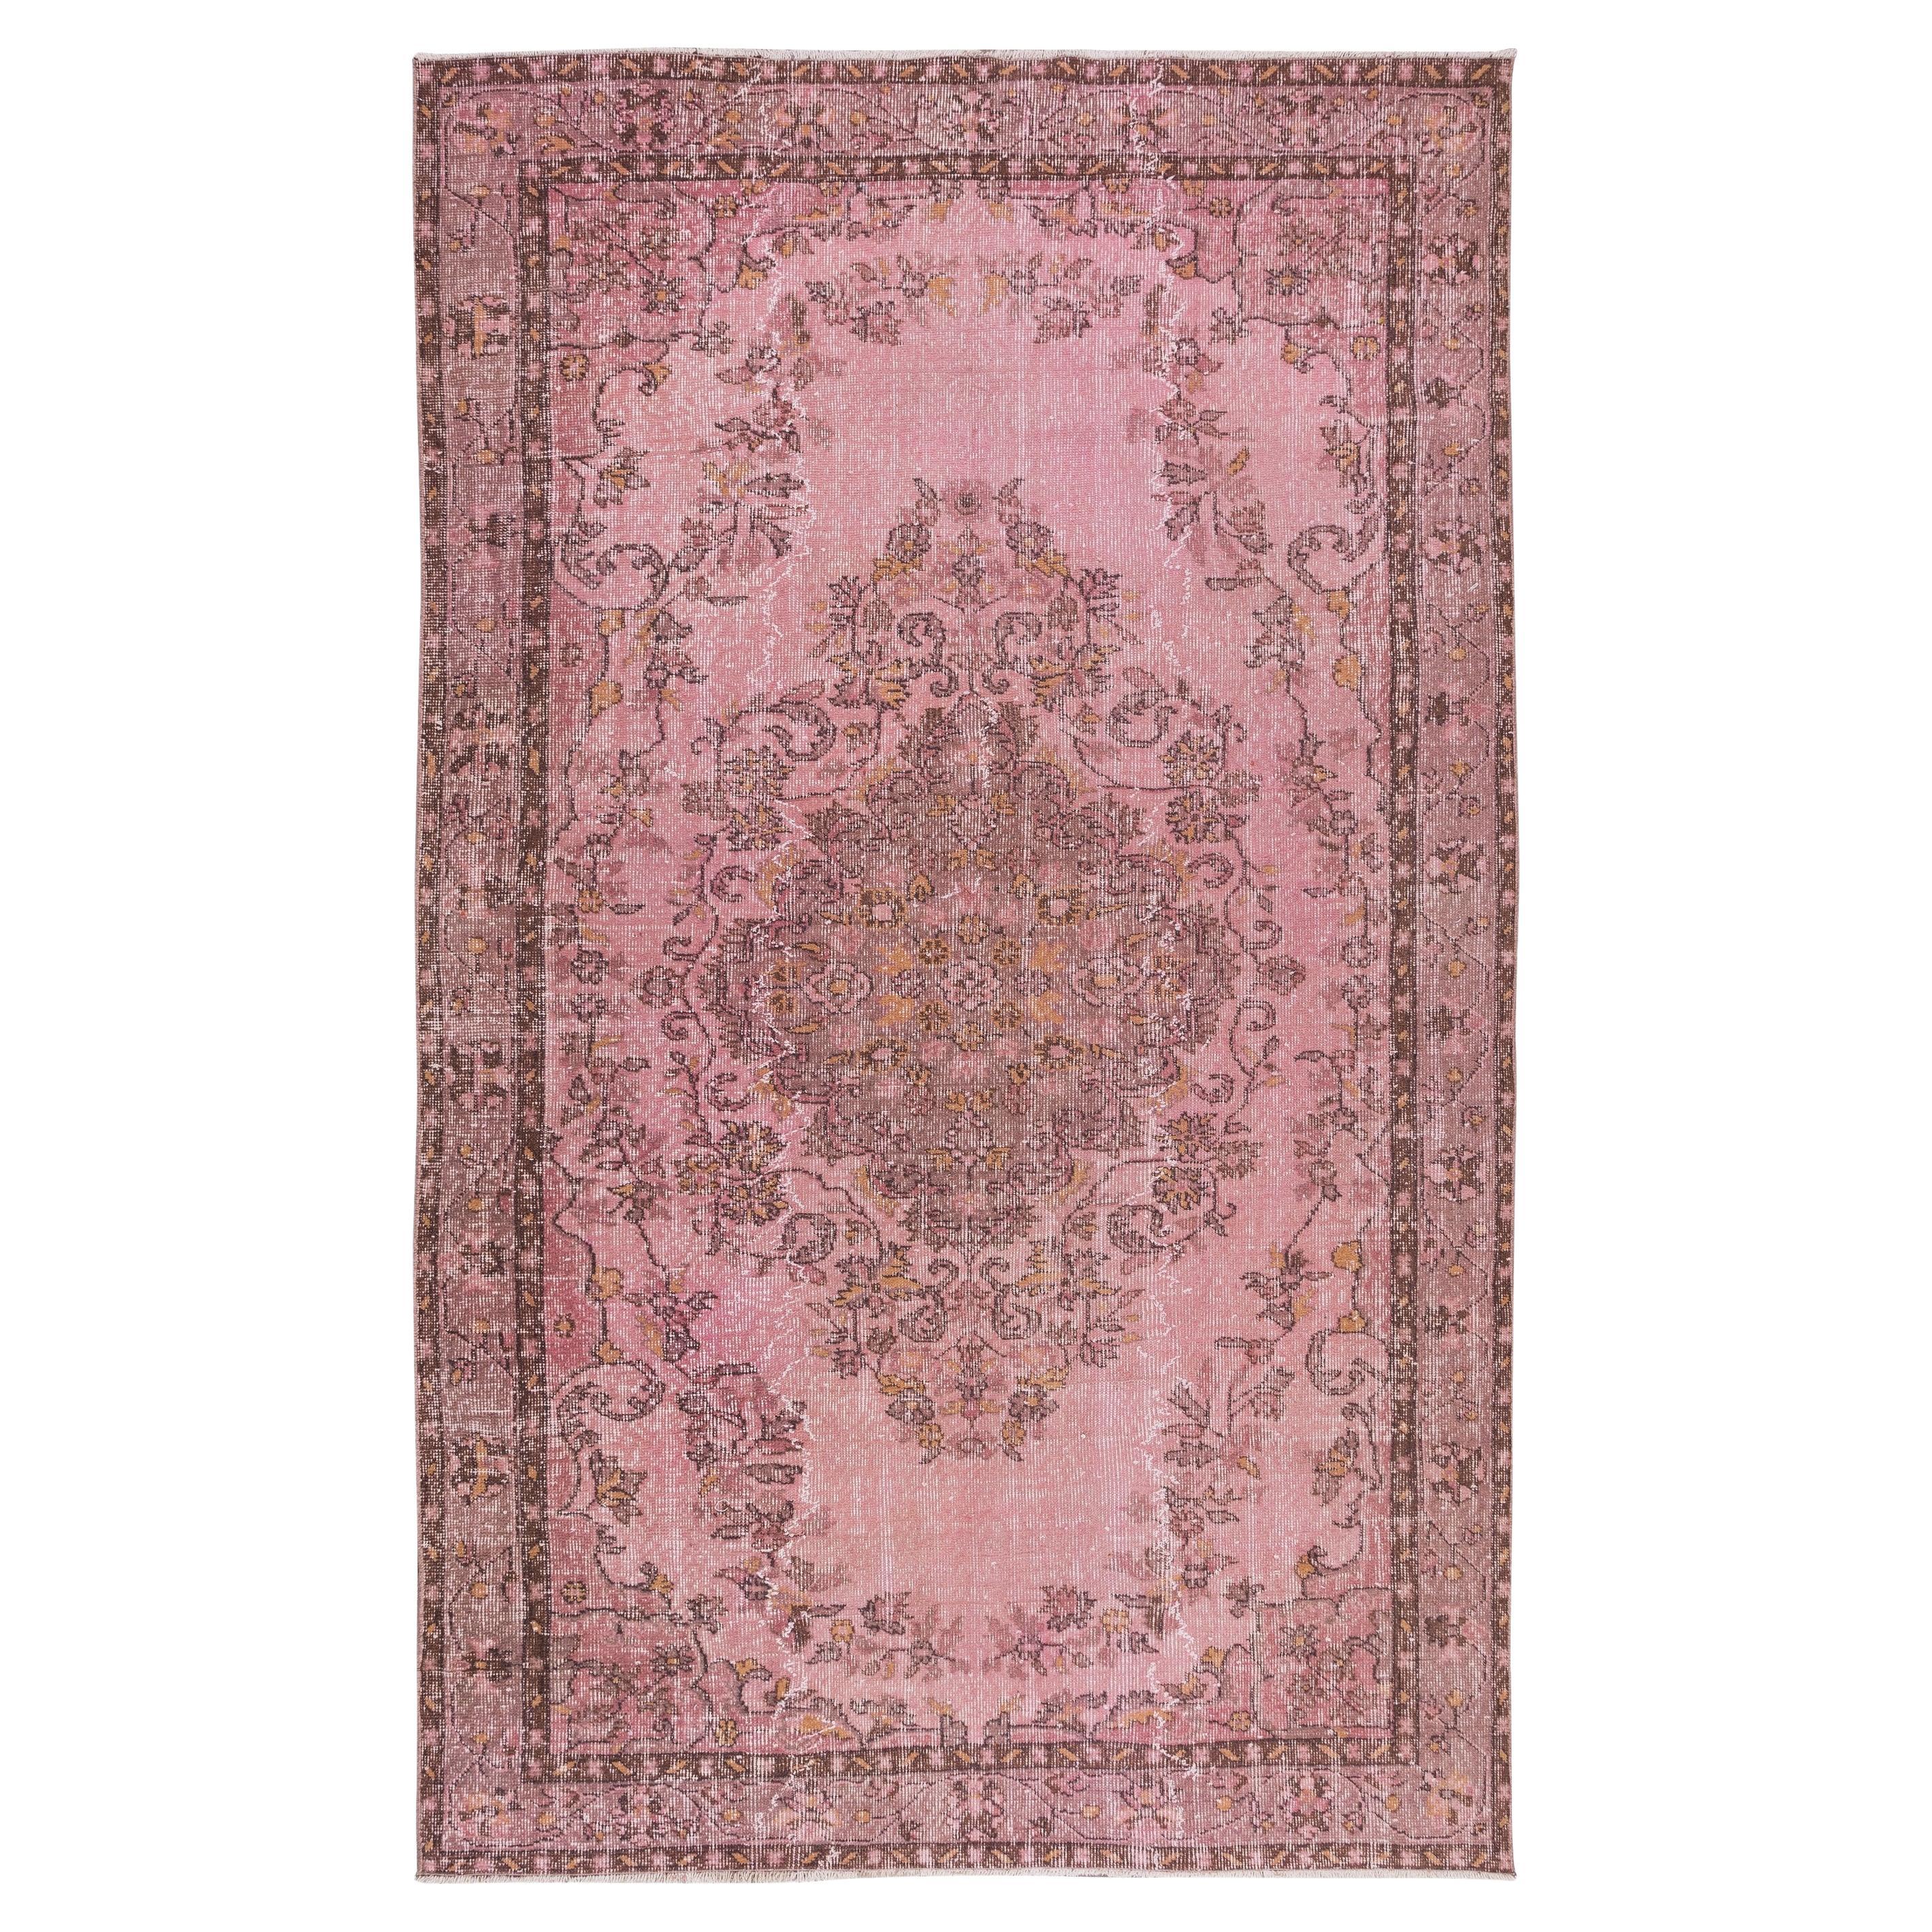 6.2x10.2 Ft Handmade Turkish Vintage Rug Over-Dyed in Pink for Modern Interiors